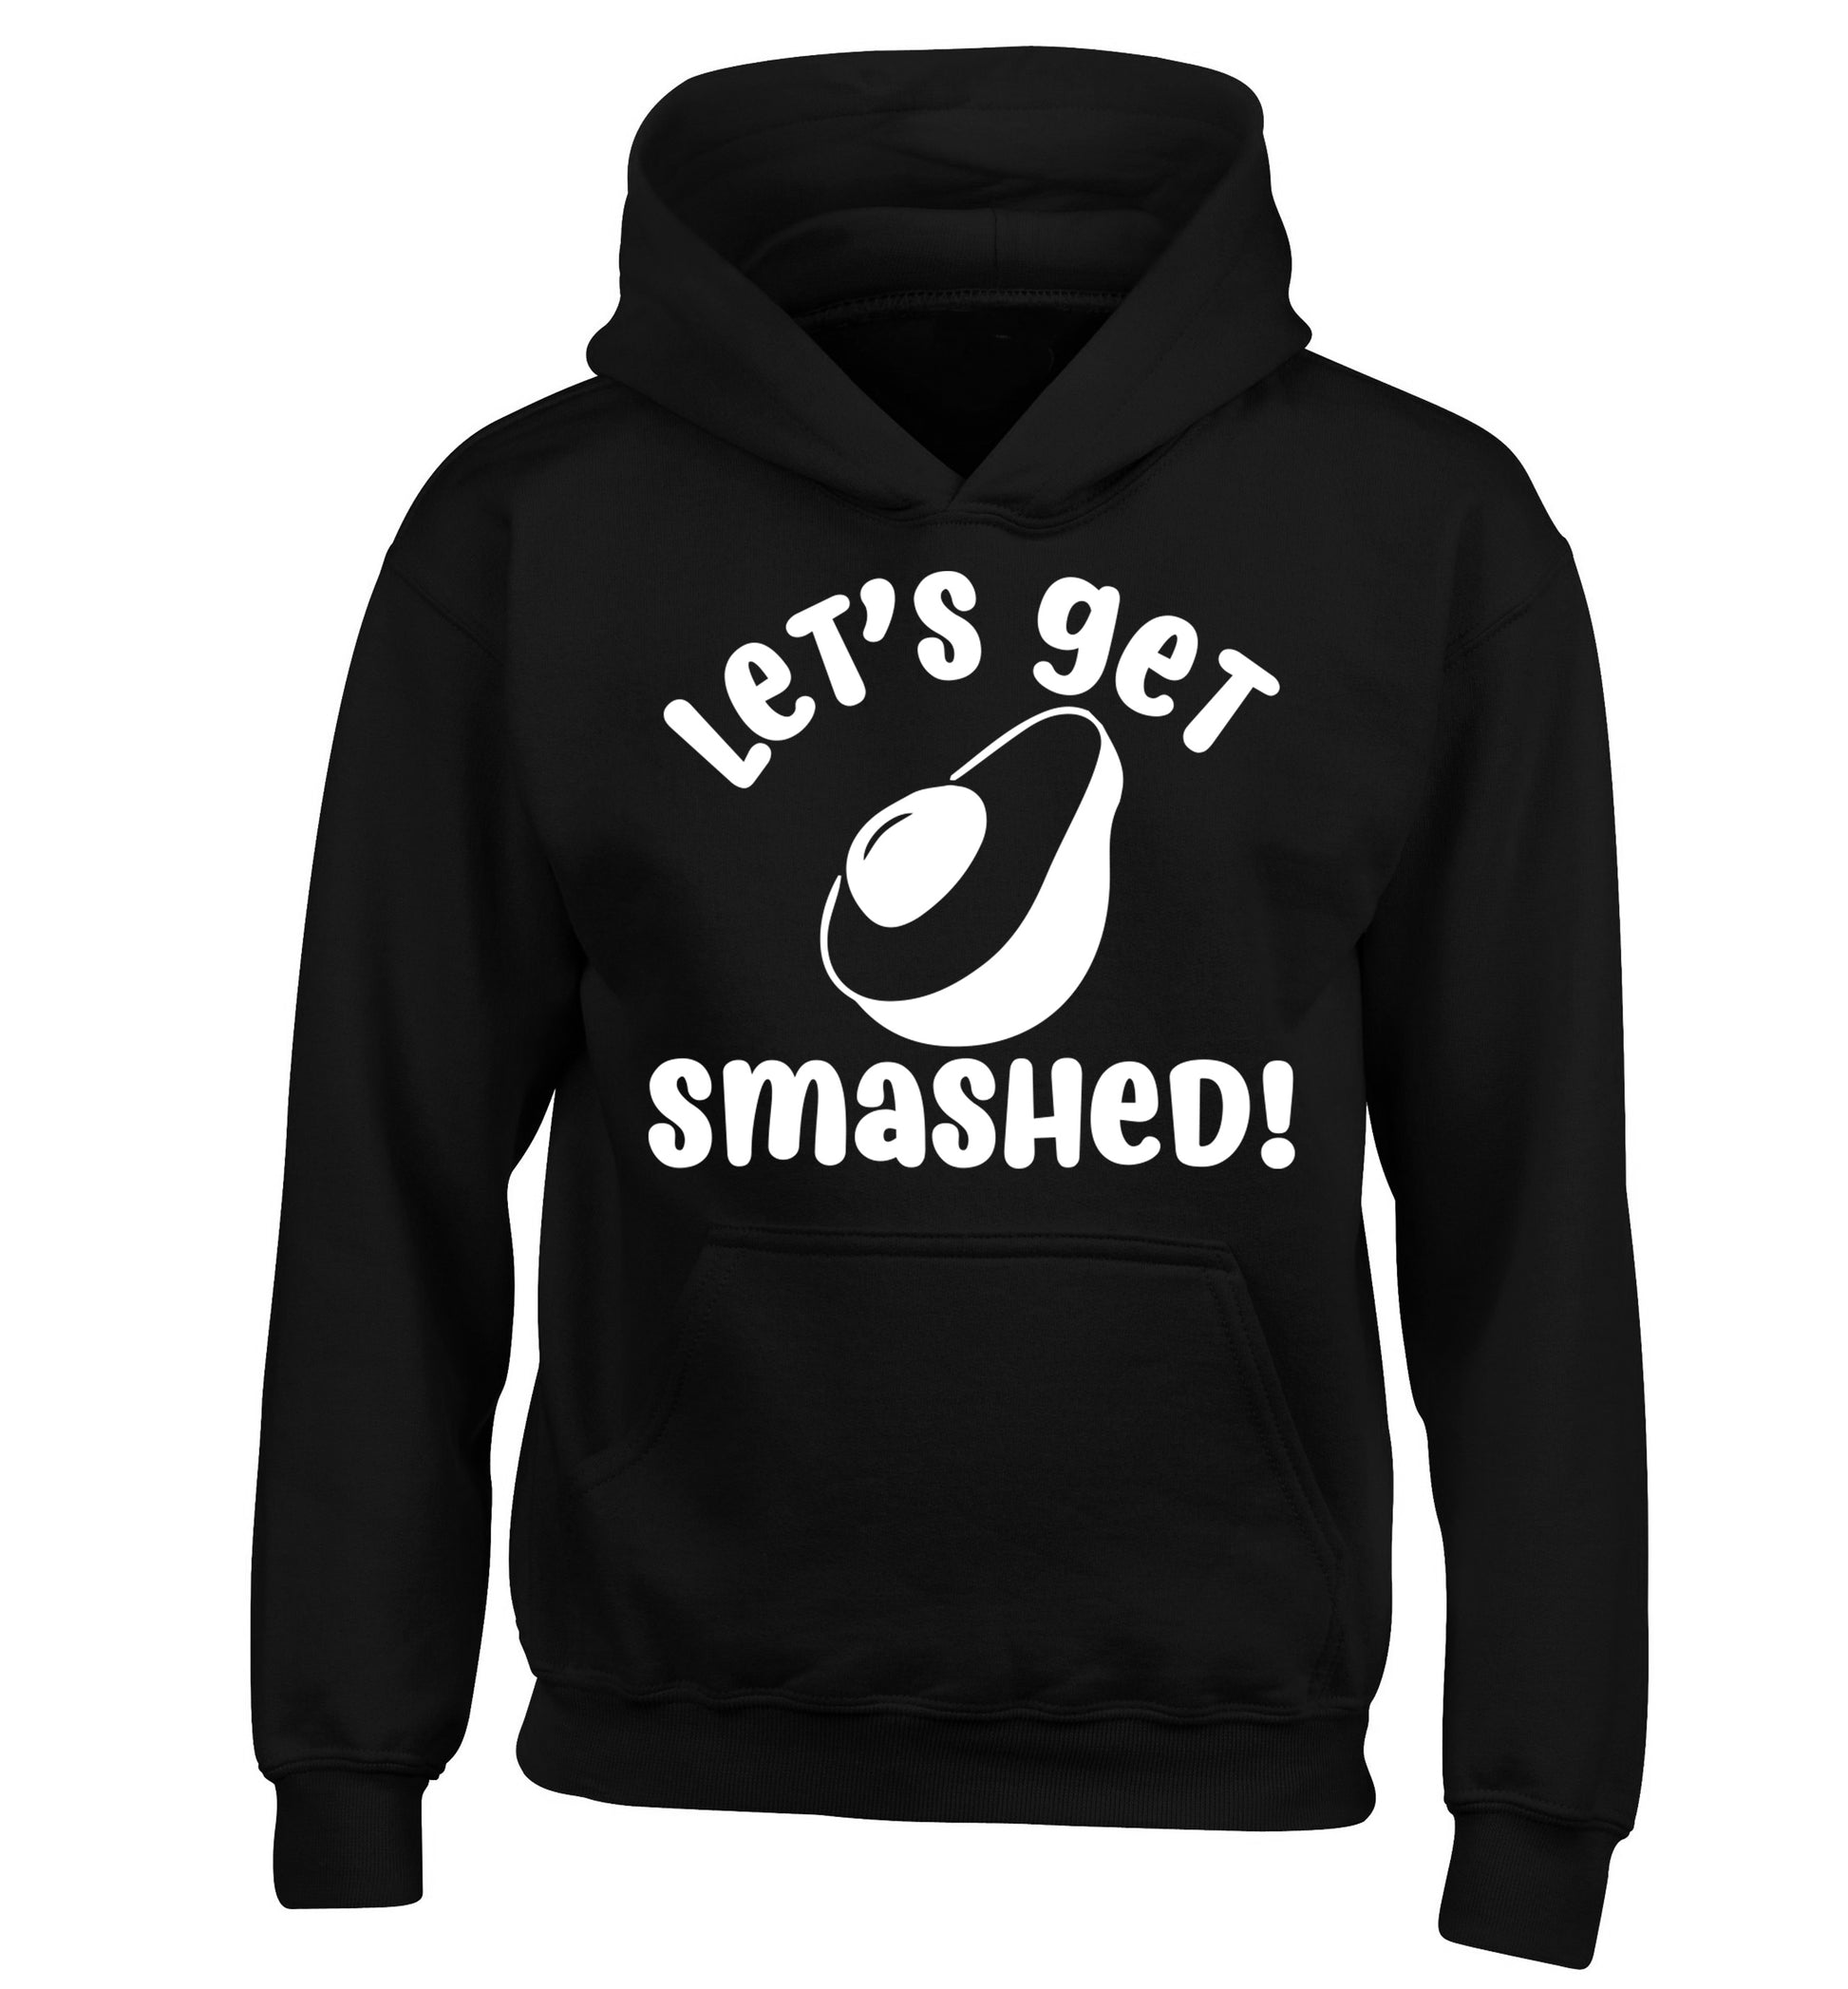 Let's get smashed children's black hoodie 12-14 Years